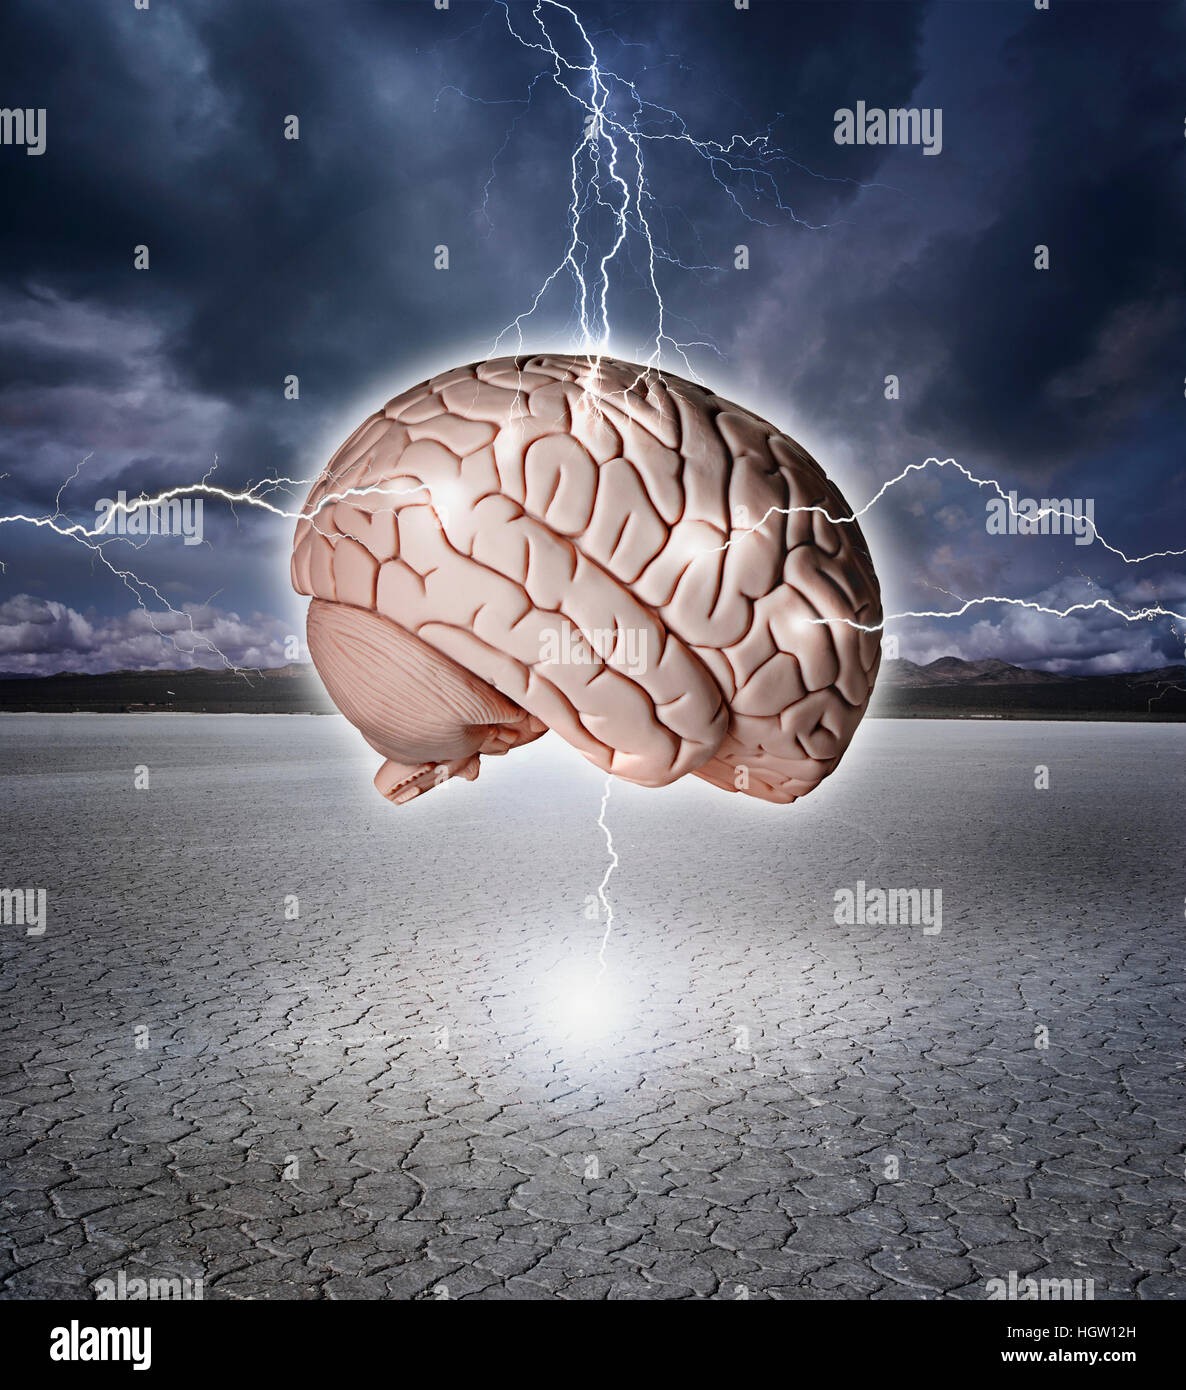 Digital Composite Of A Brain Model Being Shocked With Lightning Over A Dry Lake Bed. Stock Photo